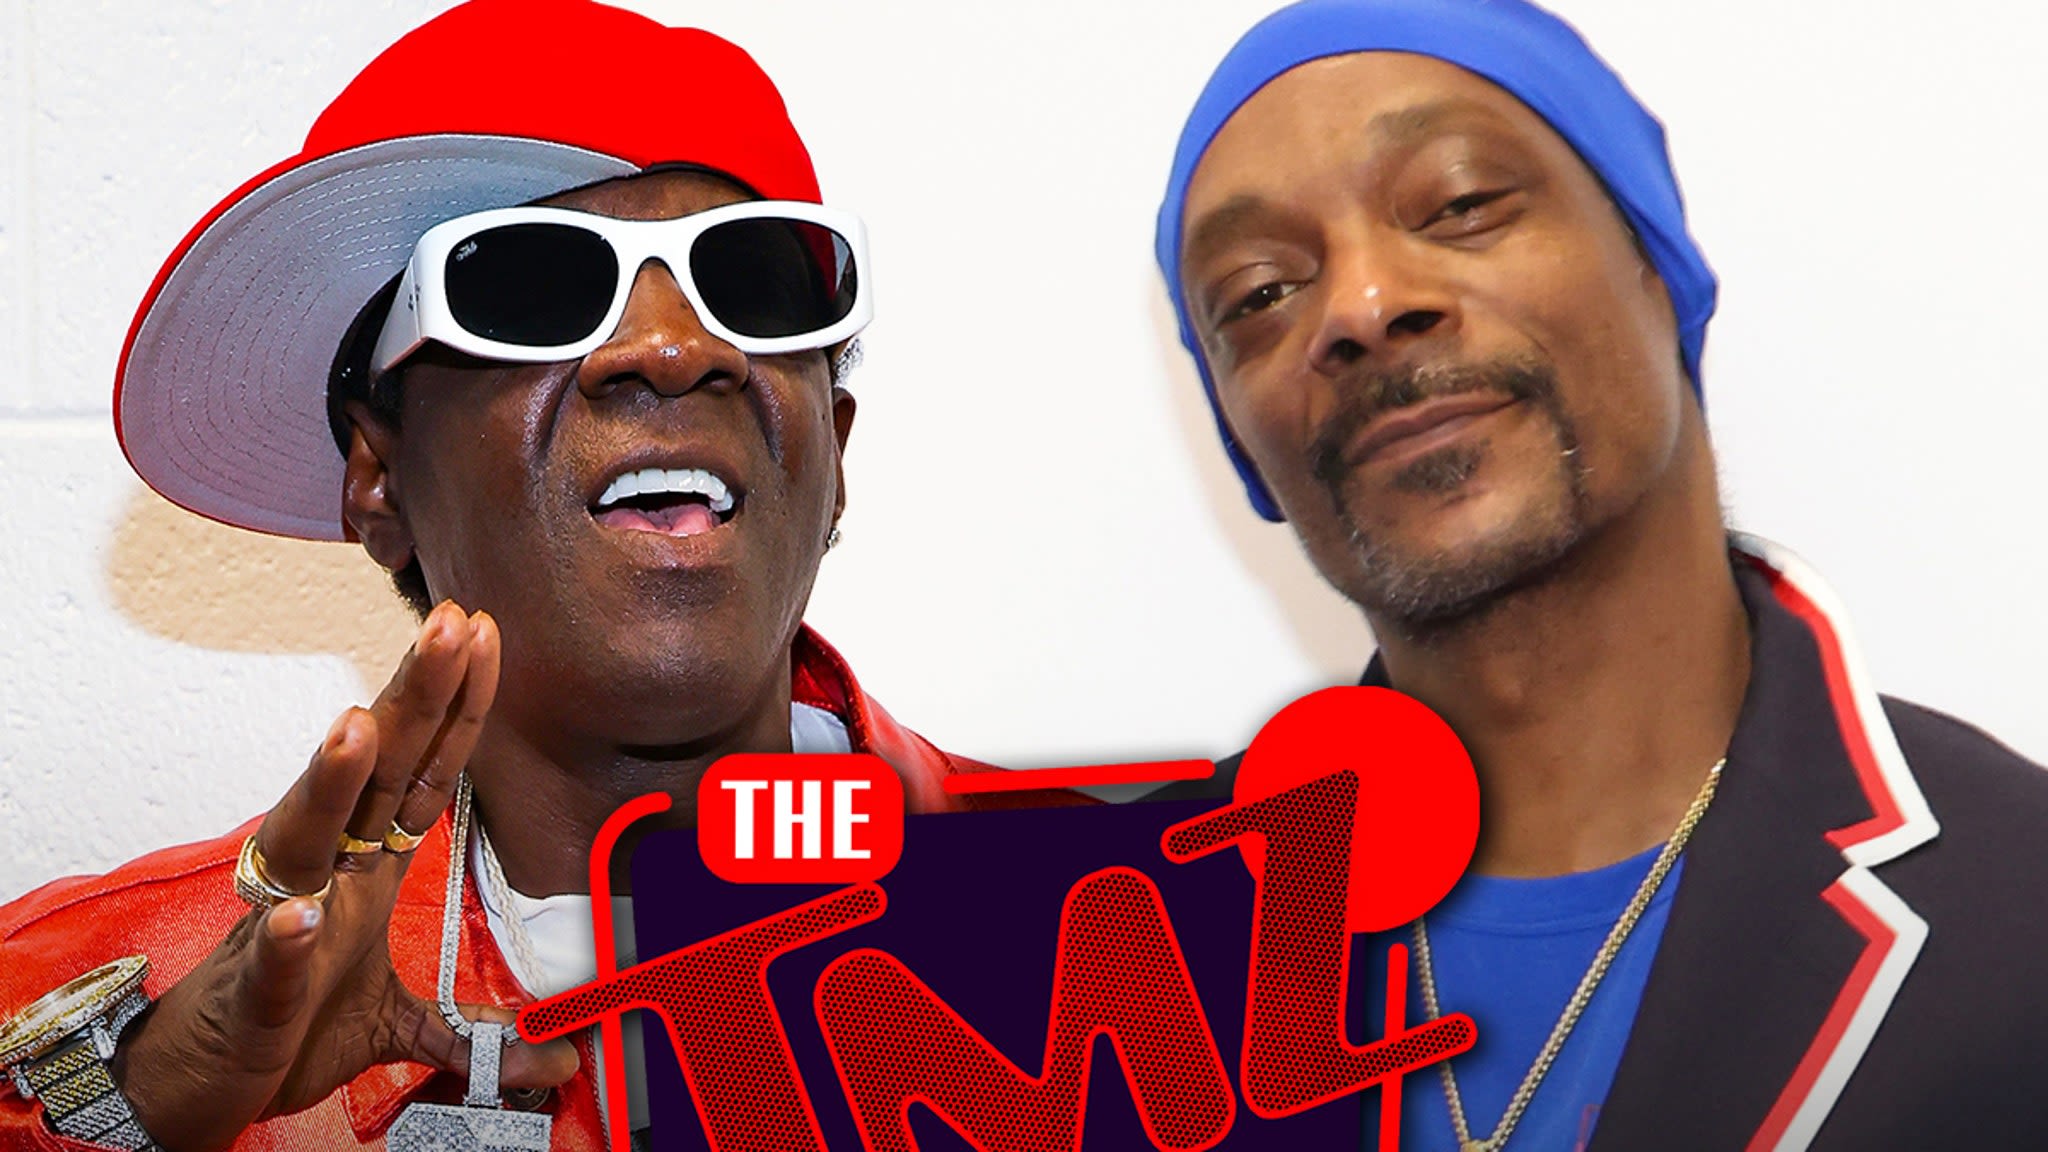 Flavor Flav Says Snoop Dogg's Olympic Torchbearer Role Is Historic Moment For Rap Music